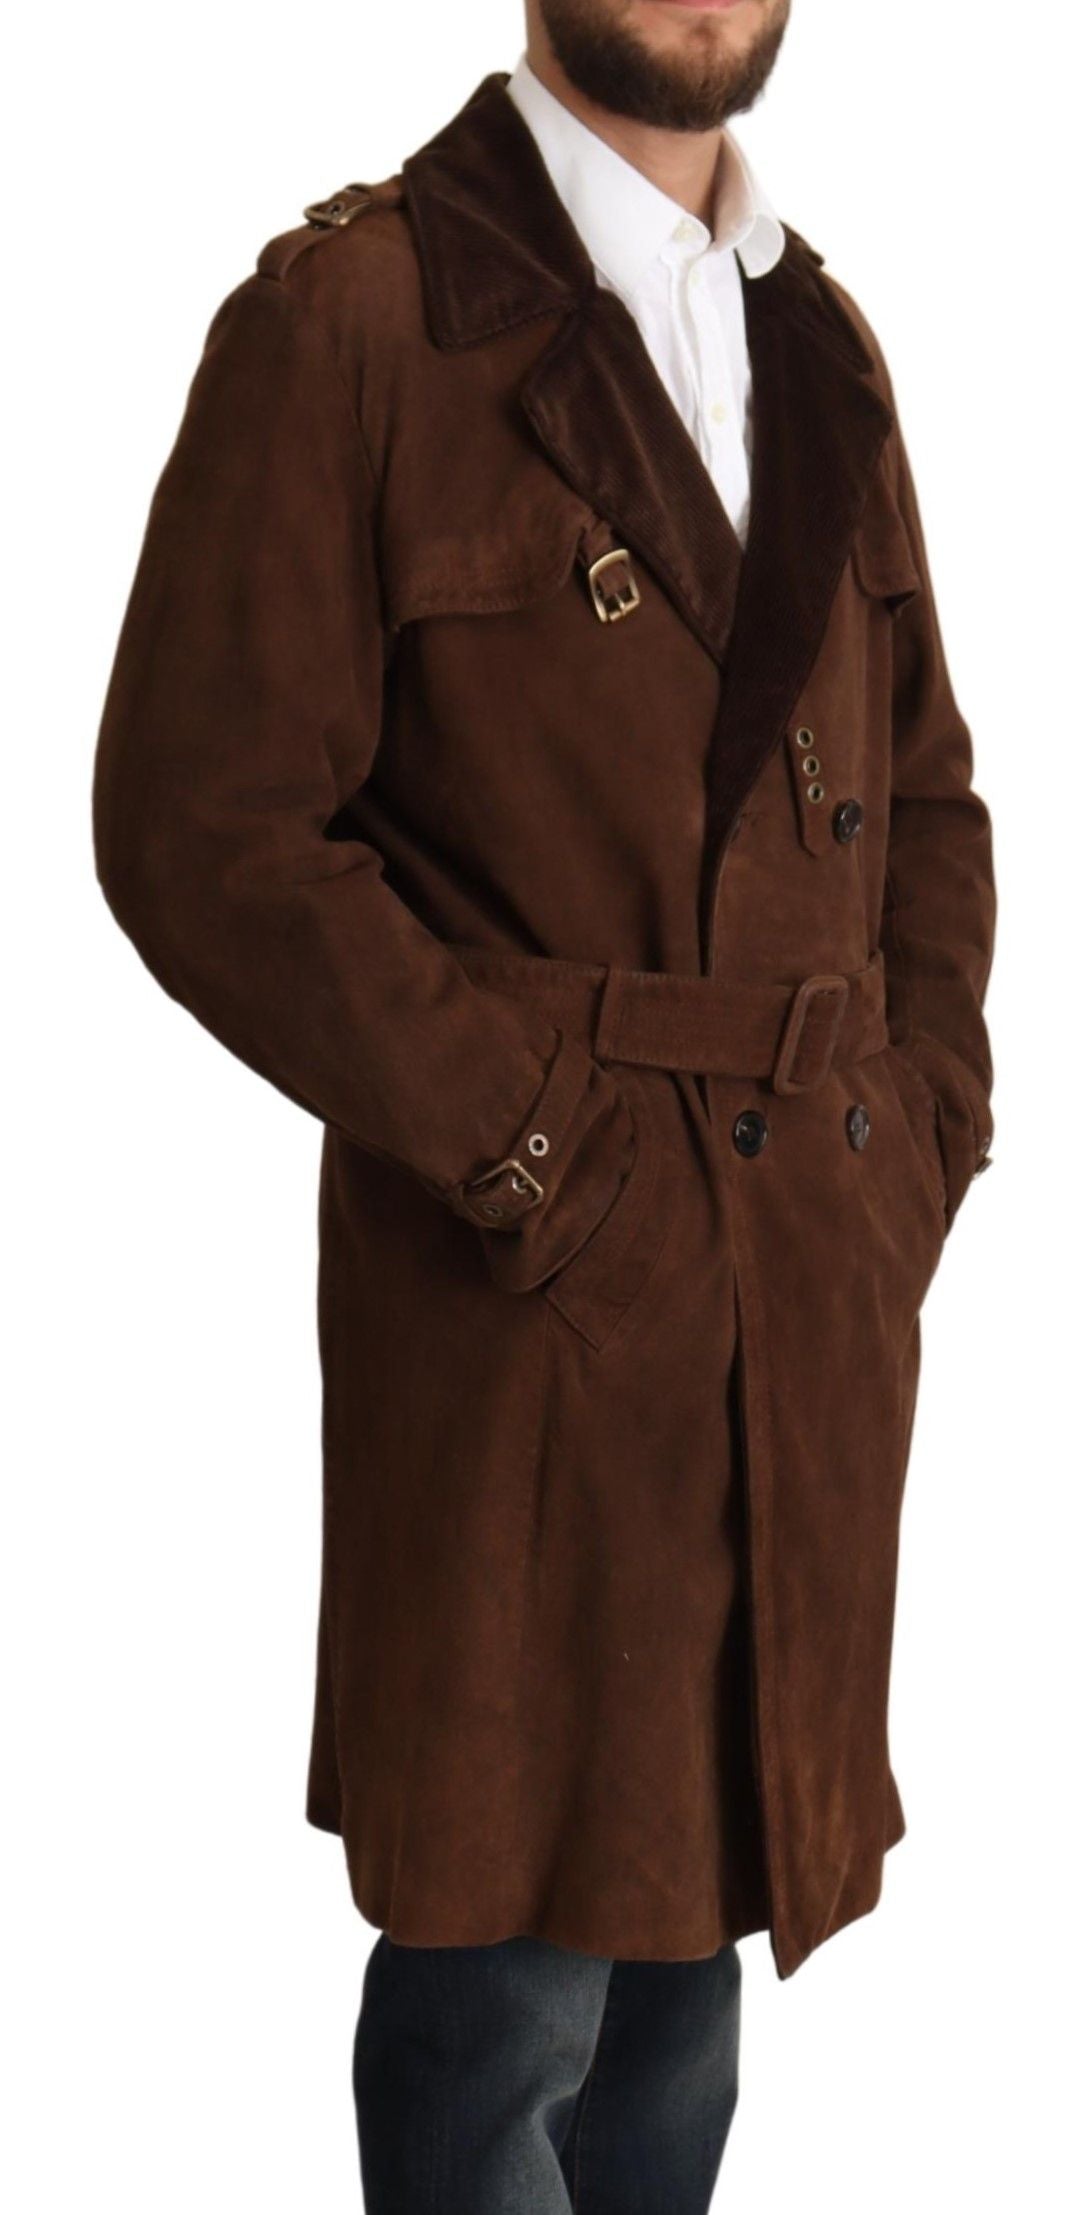 Brown Leather Long Trench Coat Men Jacket - Designed by Dolce & Gabbana Available to Buy at a Discounted Price on Moon Behind The Hill Online Designer Discount Store